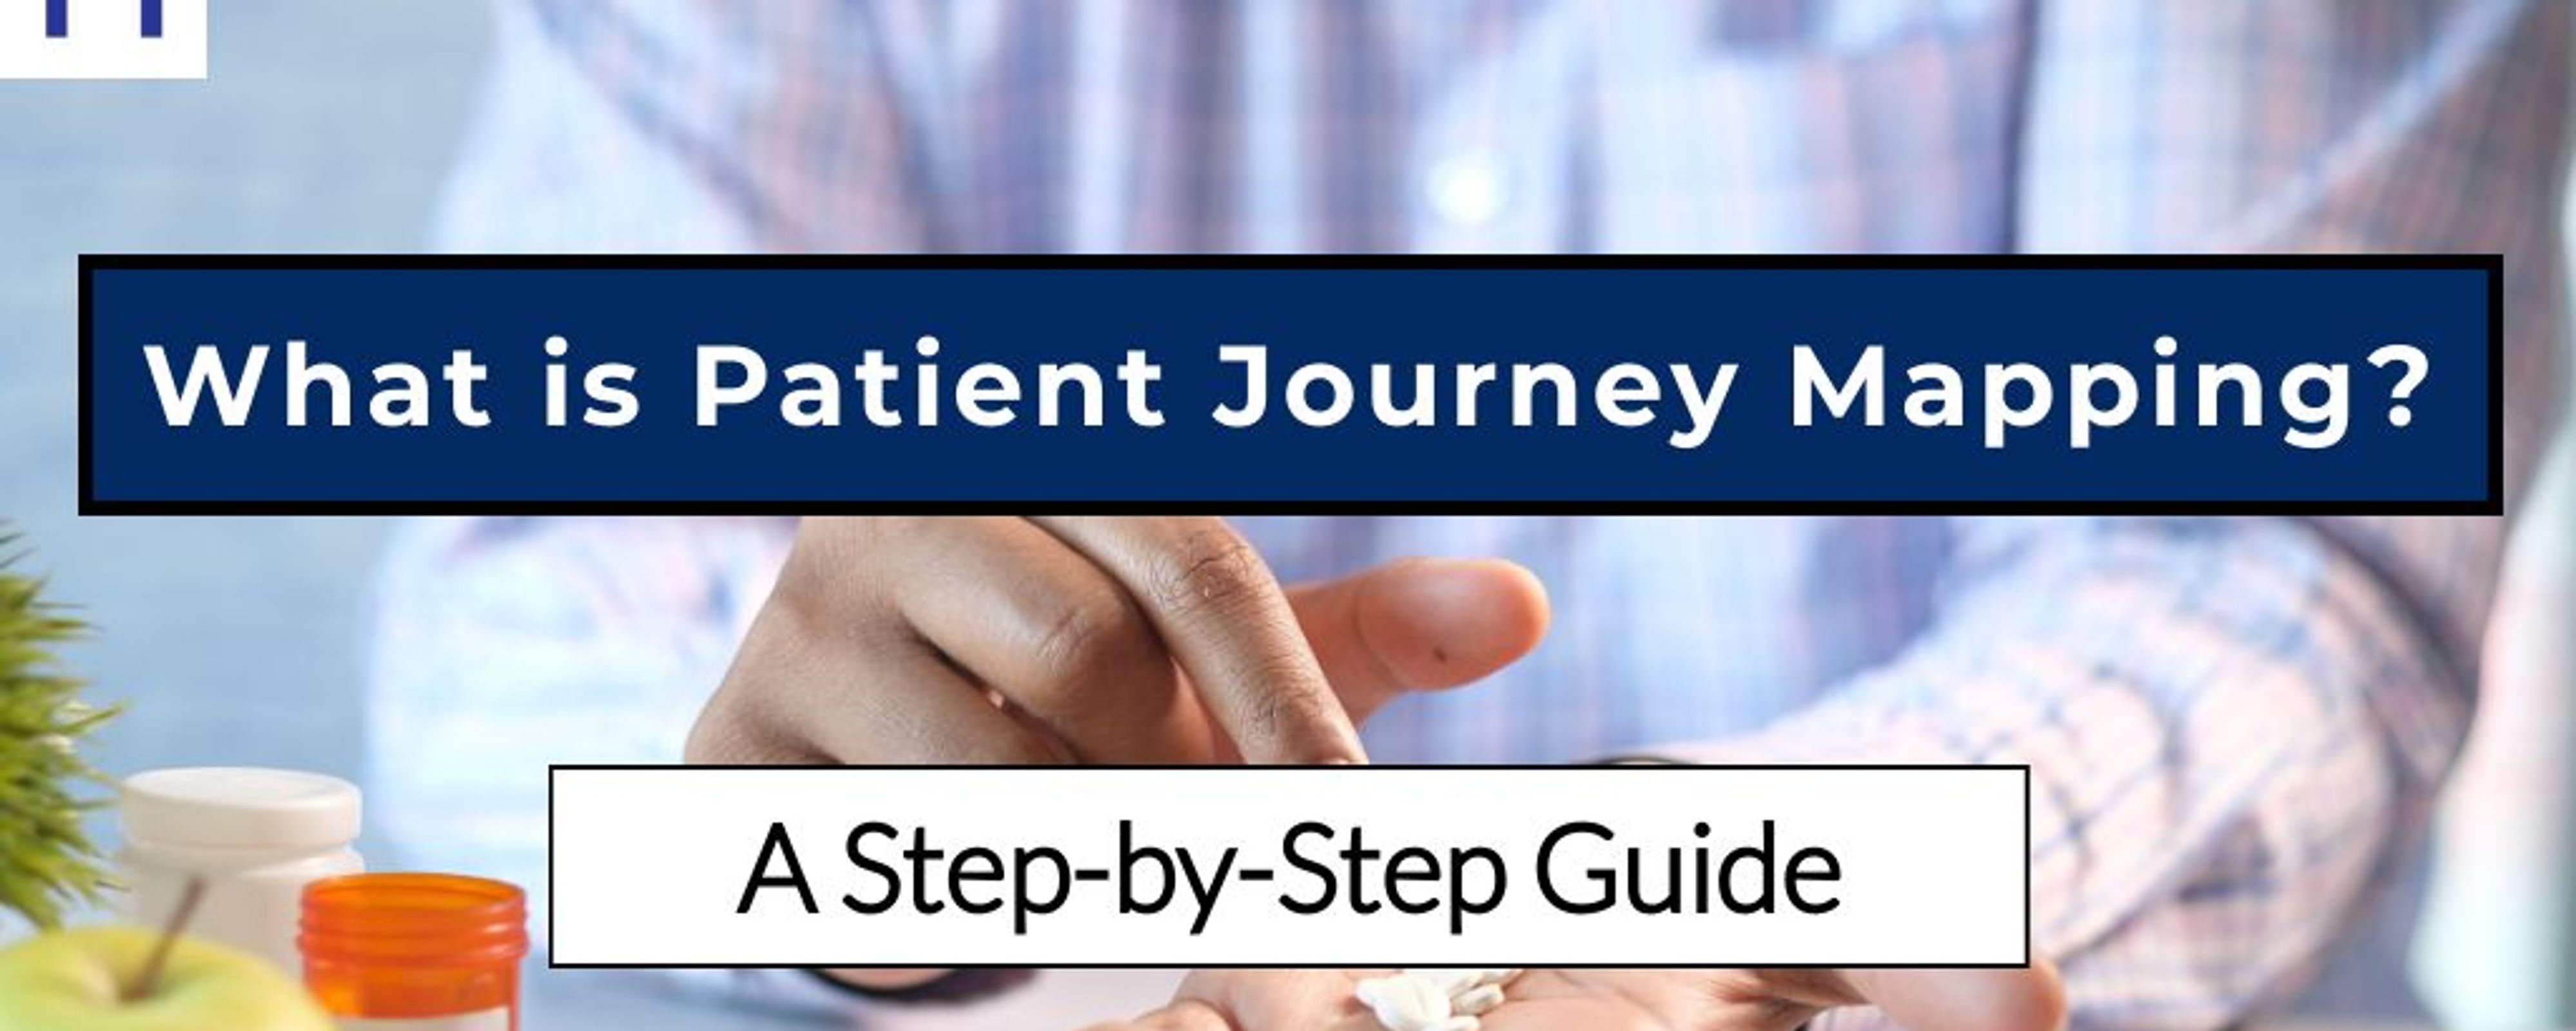 What is Patient Journey Mapping